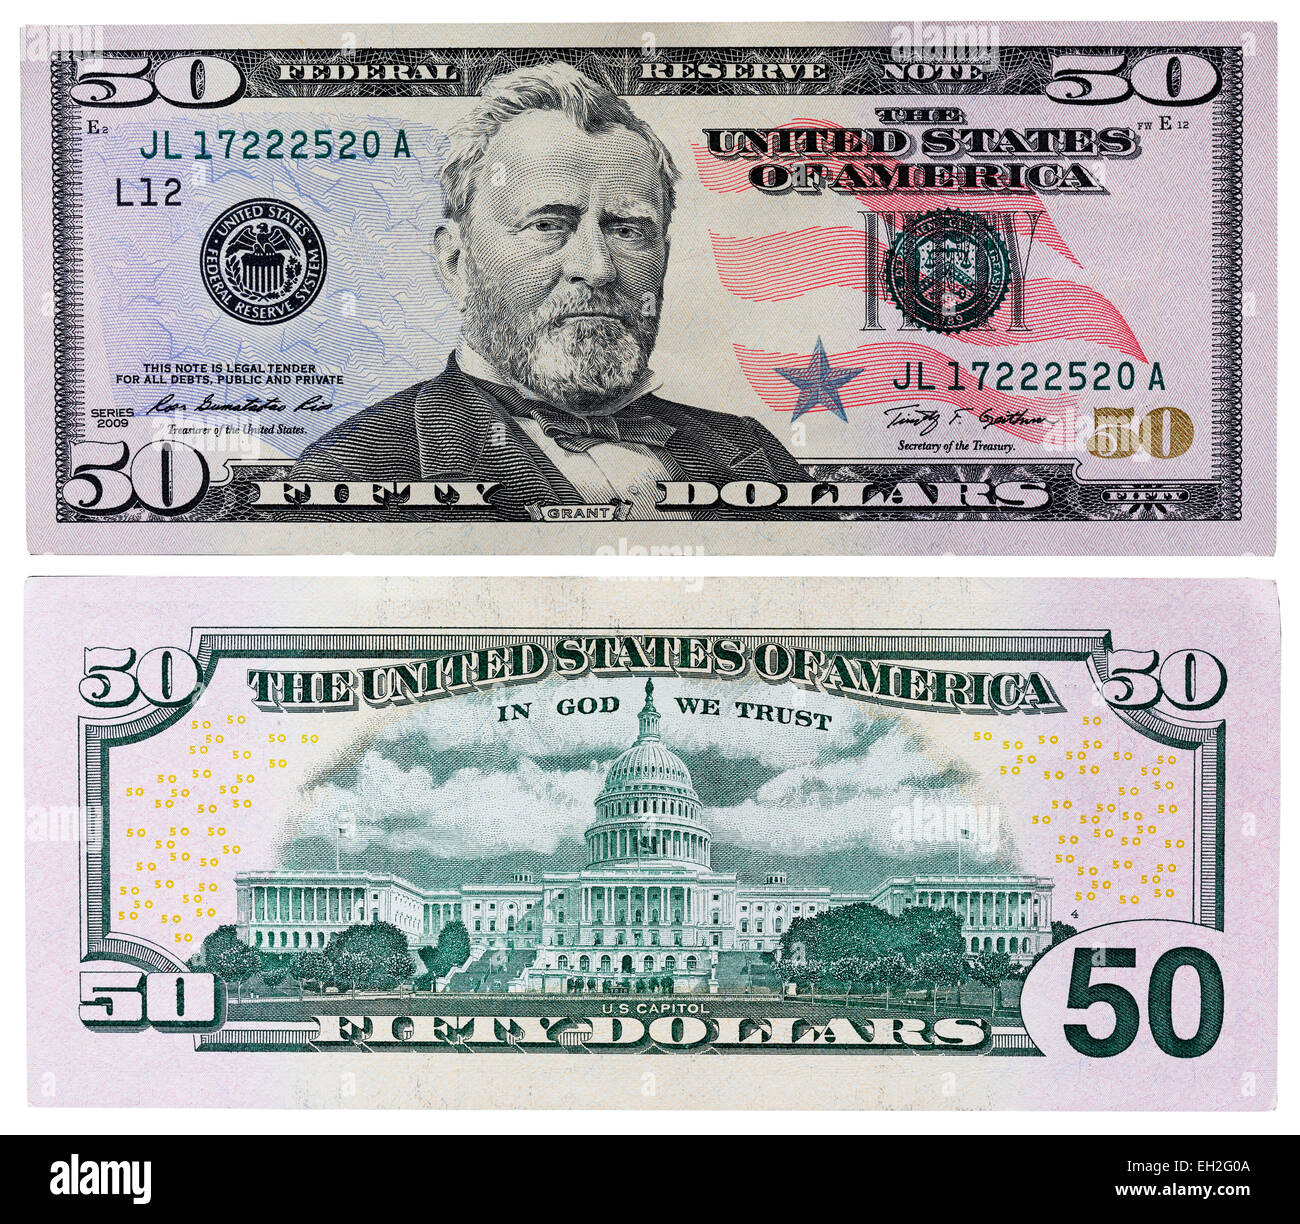 50 dollars banknote, president Ulysses Grant, United States Capitol building, USA, 2009 Stock Photo